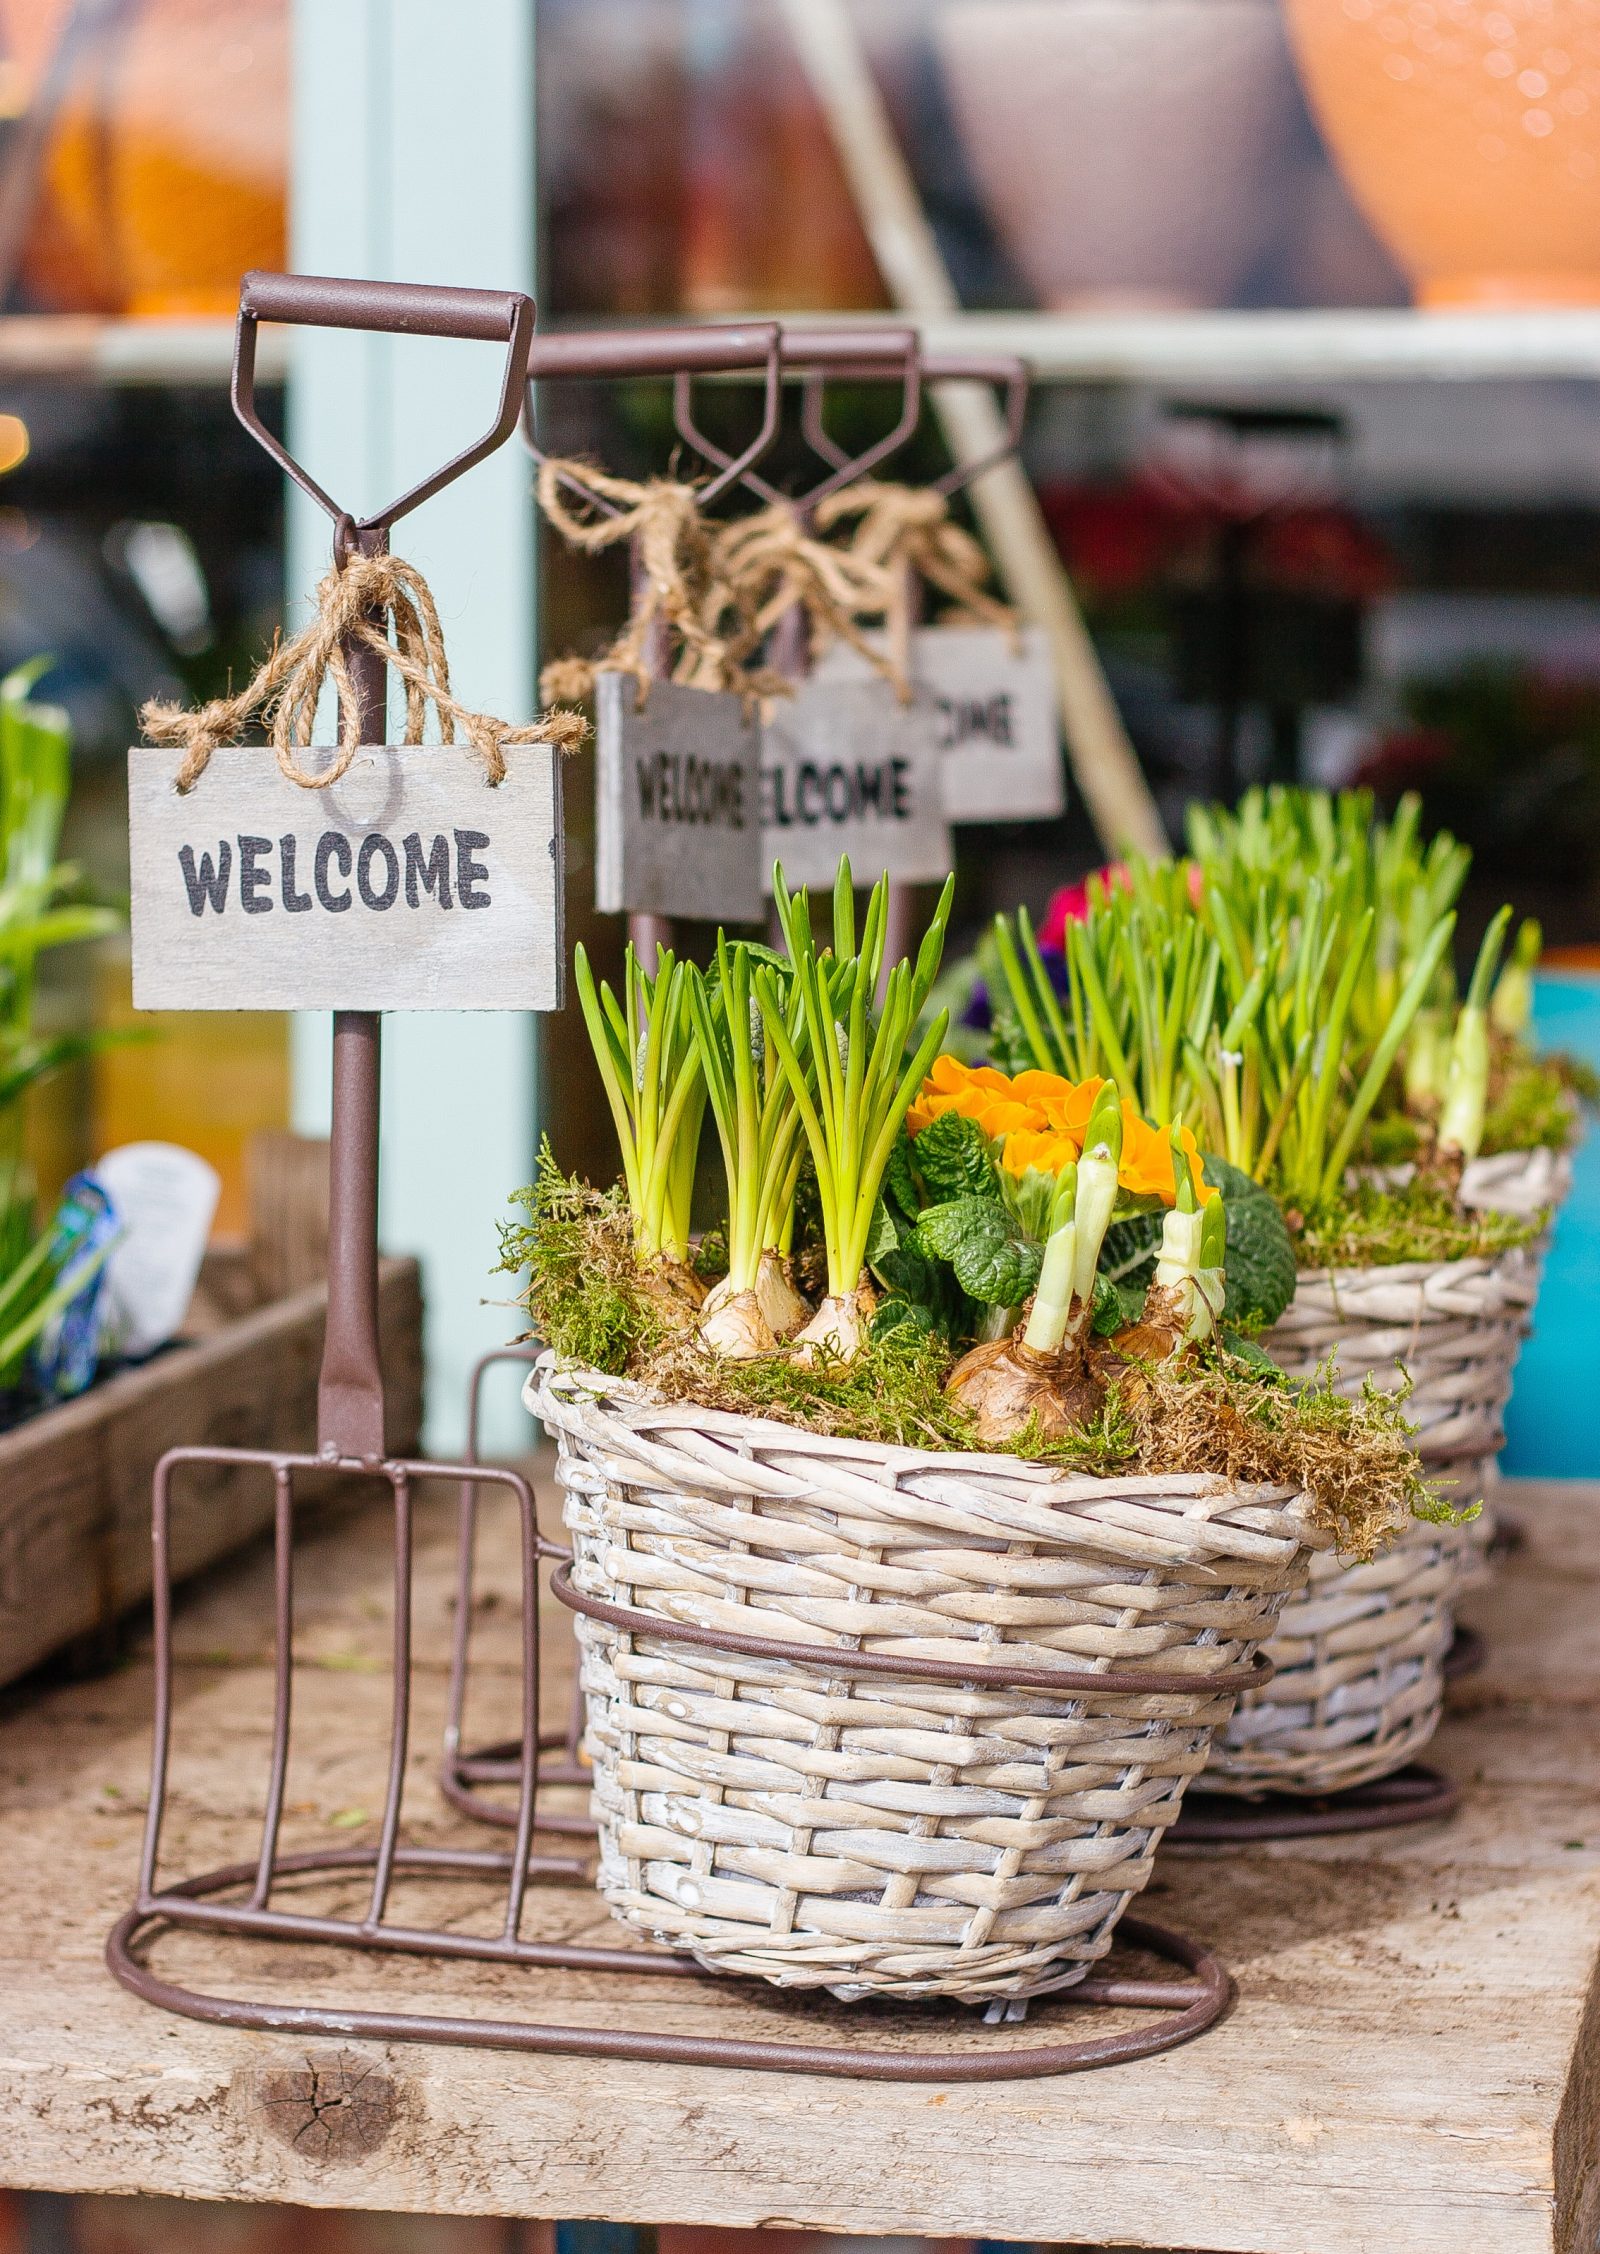 How to Plant Spring Bulbs to Maximize Curb Appeal Welcome Spring Photo By Cathal Mac An Bheatha #SpringBulbs #PlantSpringBulbs #Spring #WelcomeSpring #HelloSpring #CurbAppeal #SpringFlowers